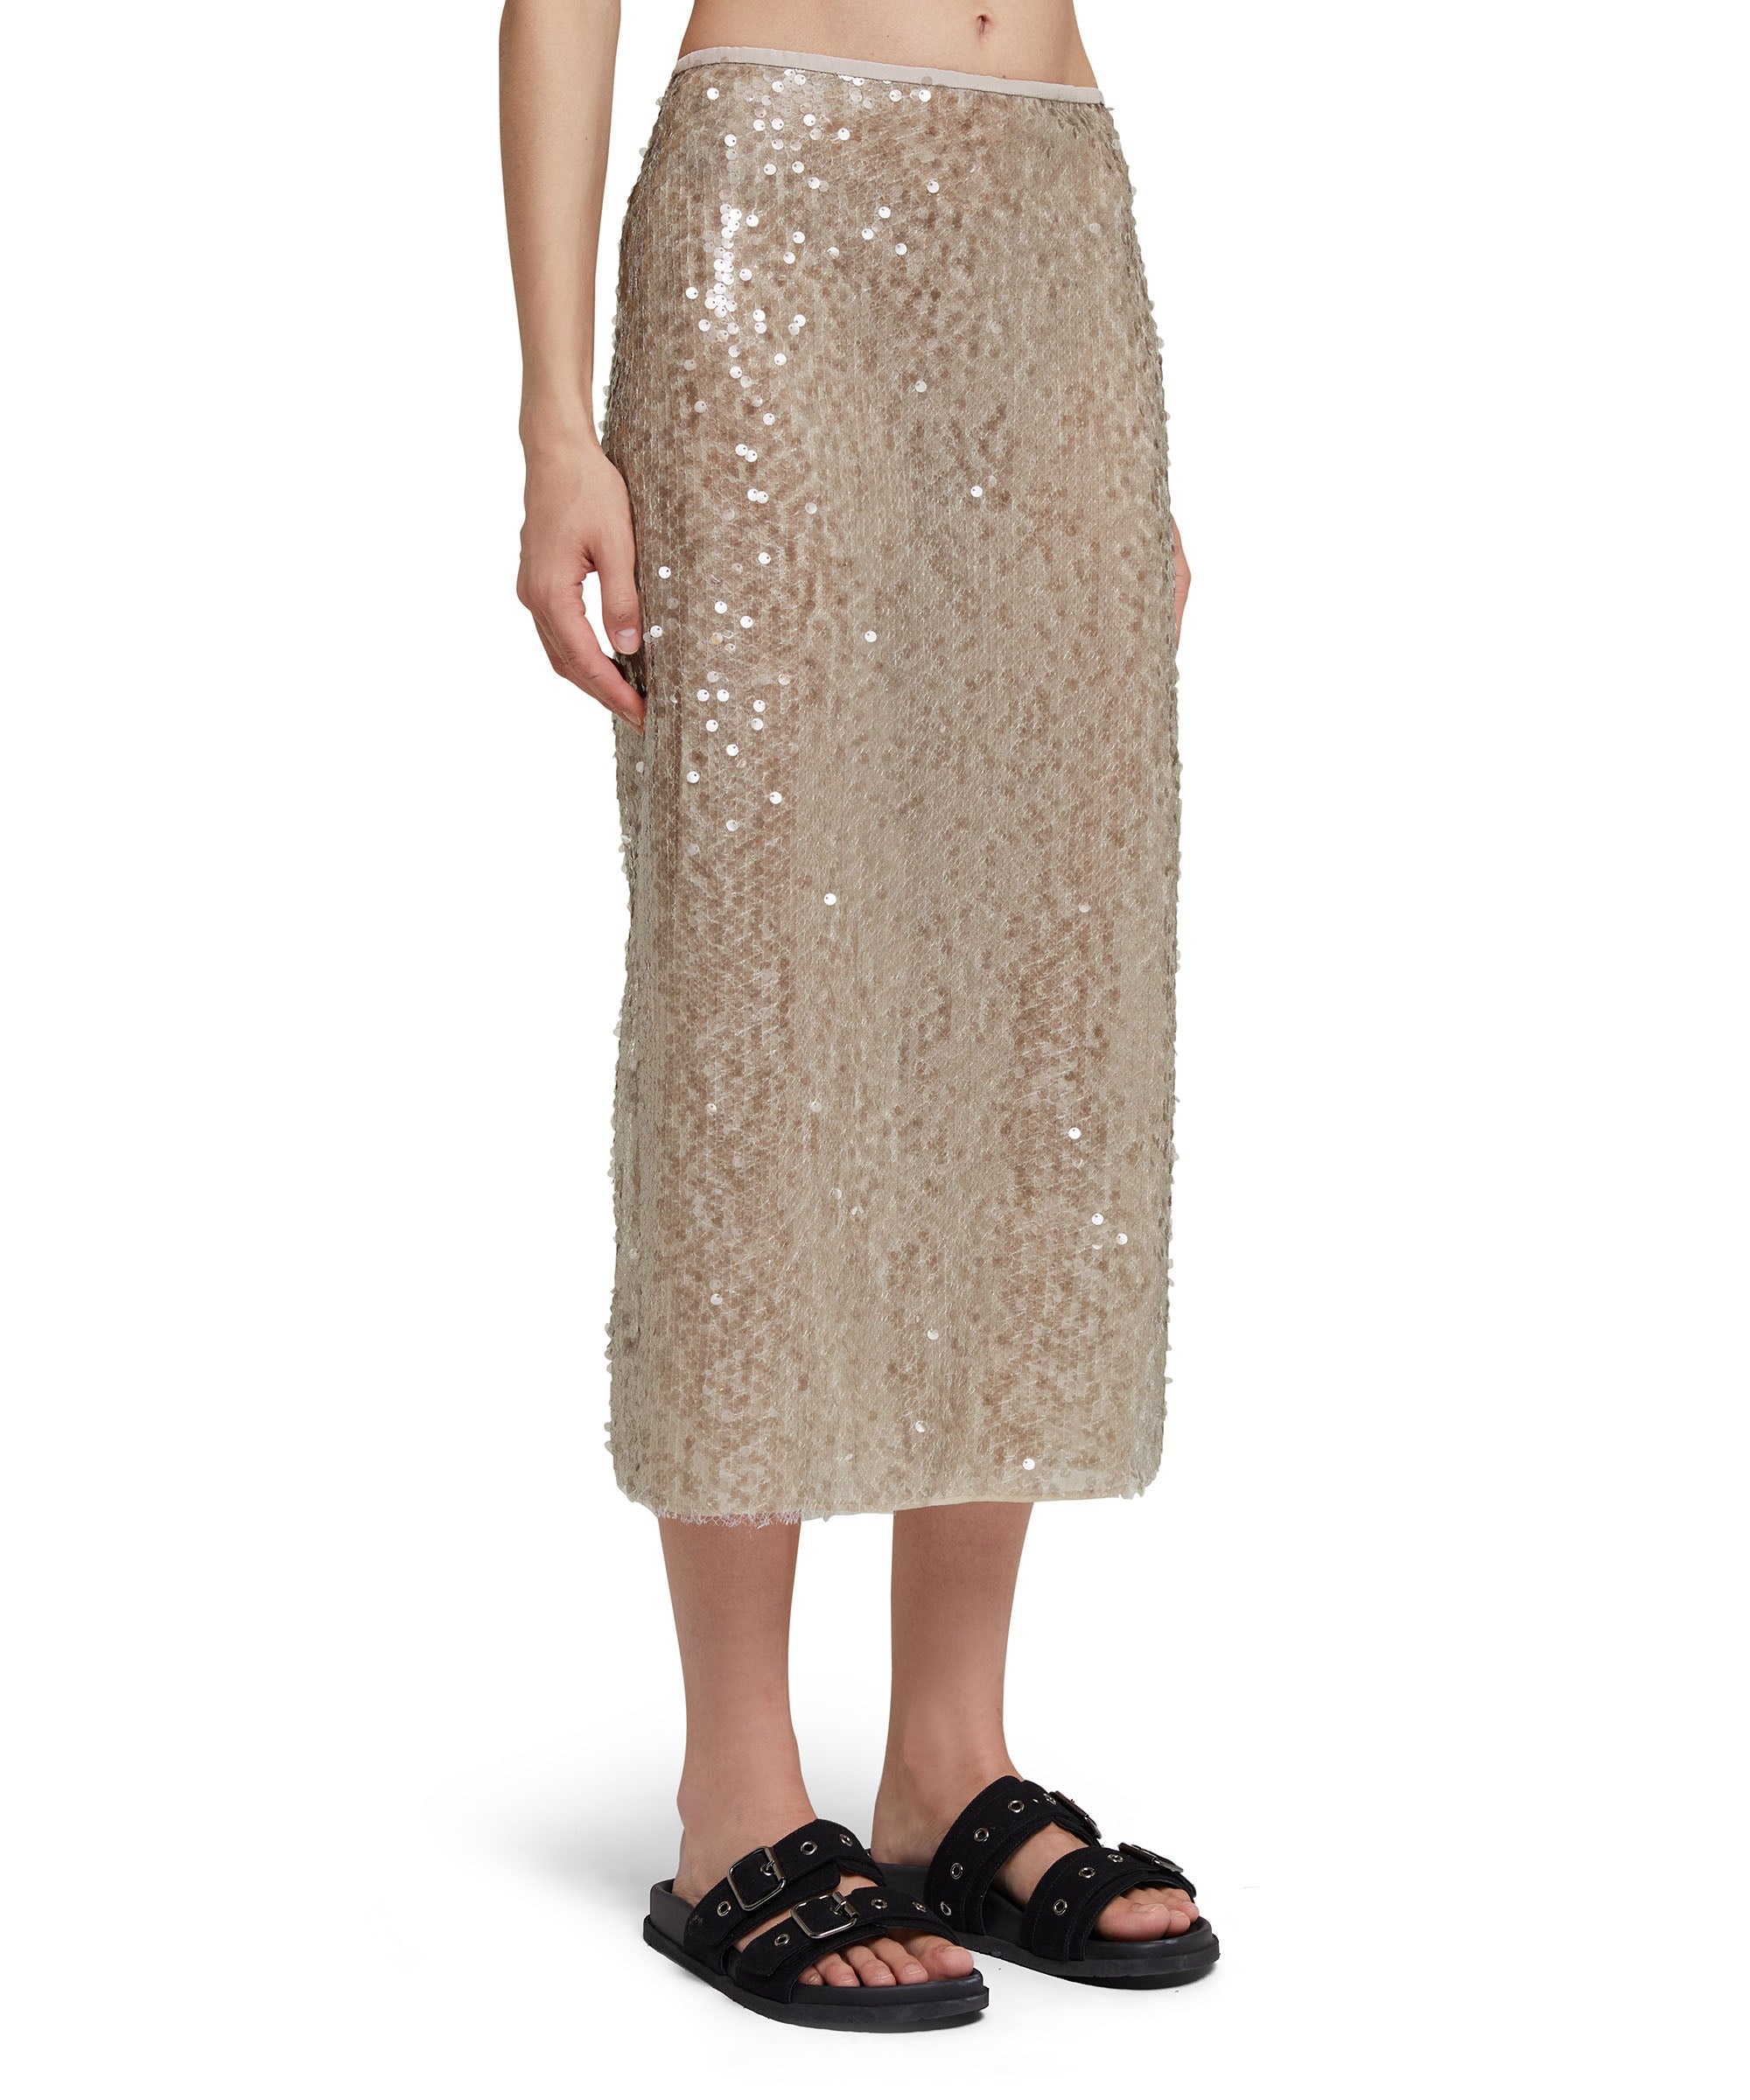 Midi dress with sequined fabric - 4